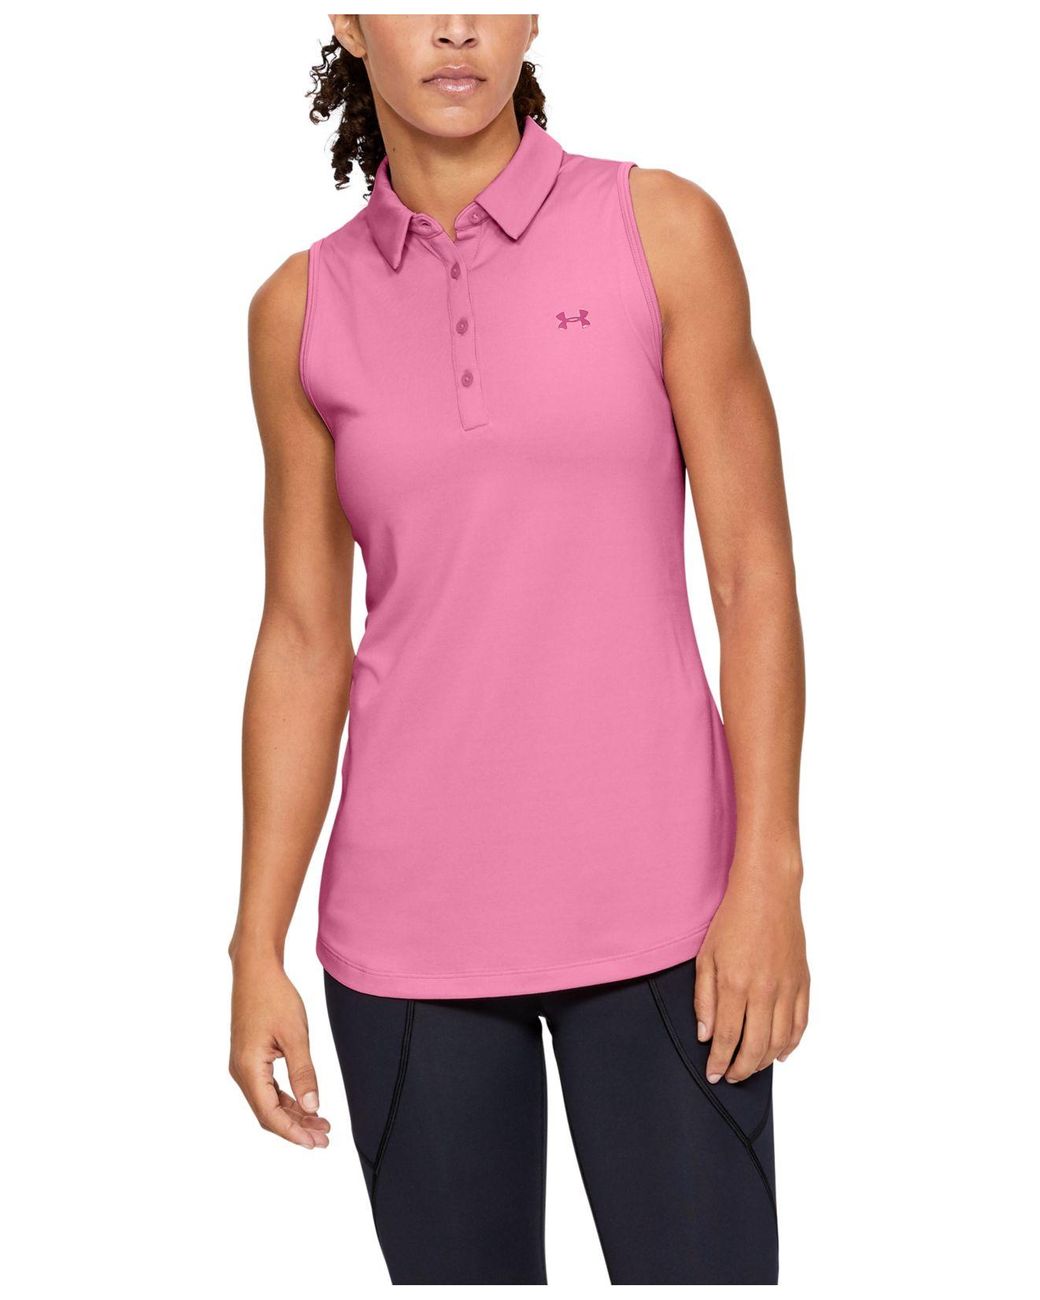 Under Armour Synthetic Ua Zinger Sleeveless Golf Polo in Pink - Lyst